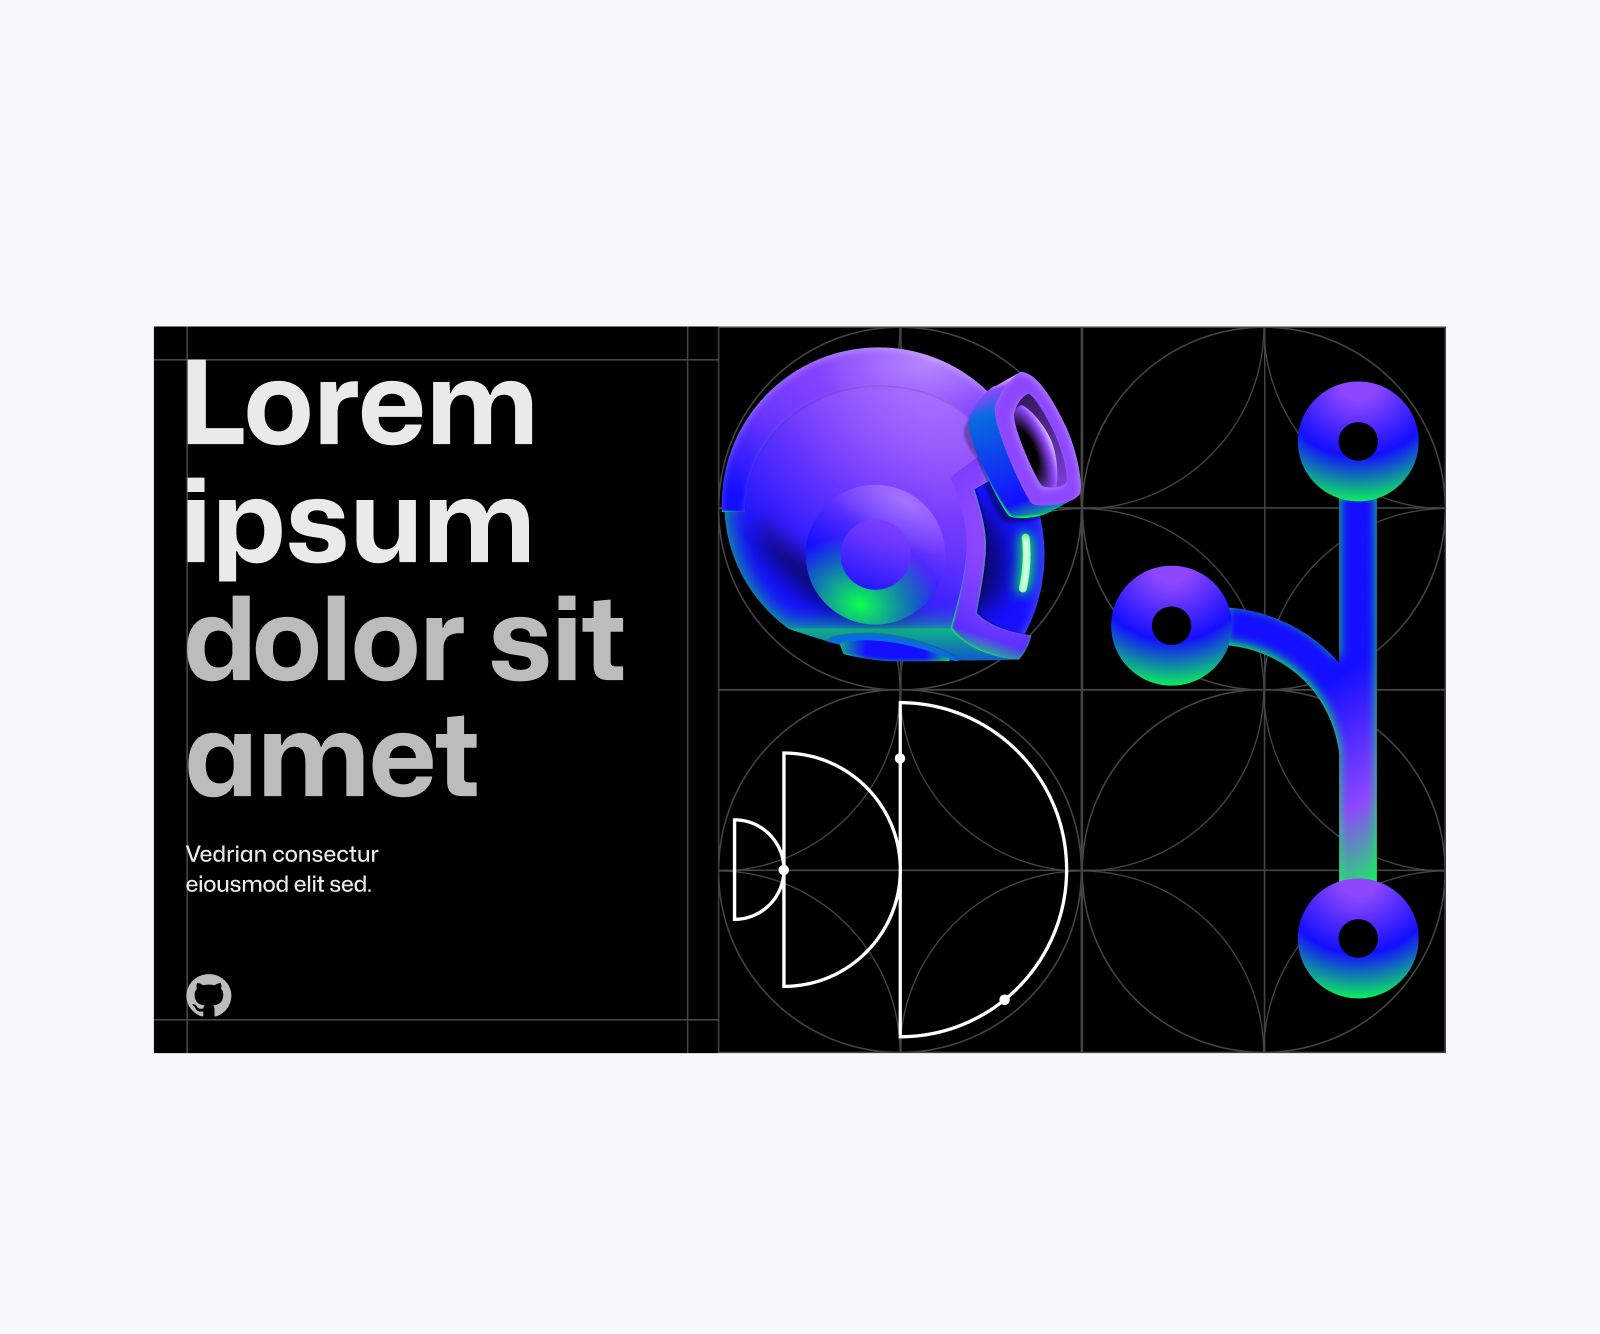 An example social asset with a black background featuring illustrations of Copilot, gitlines, and an abstract outlined shape paired with placeholder lorem ipsum copy and a small invertocat logo in the corner